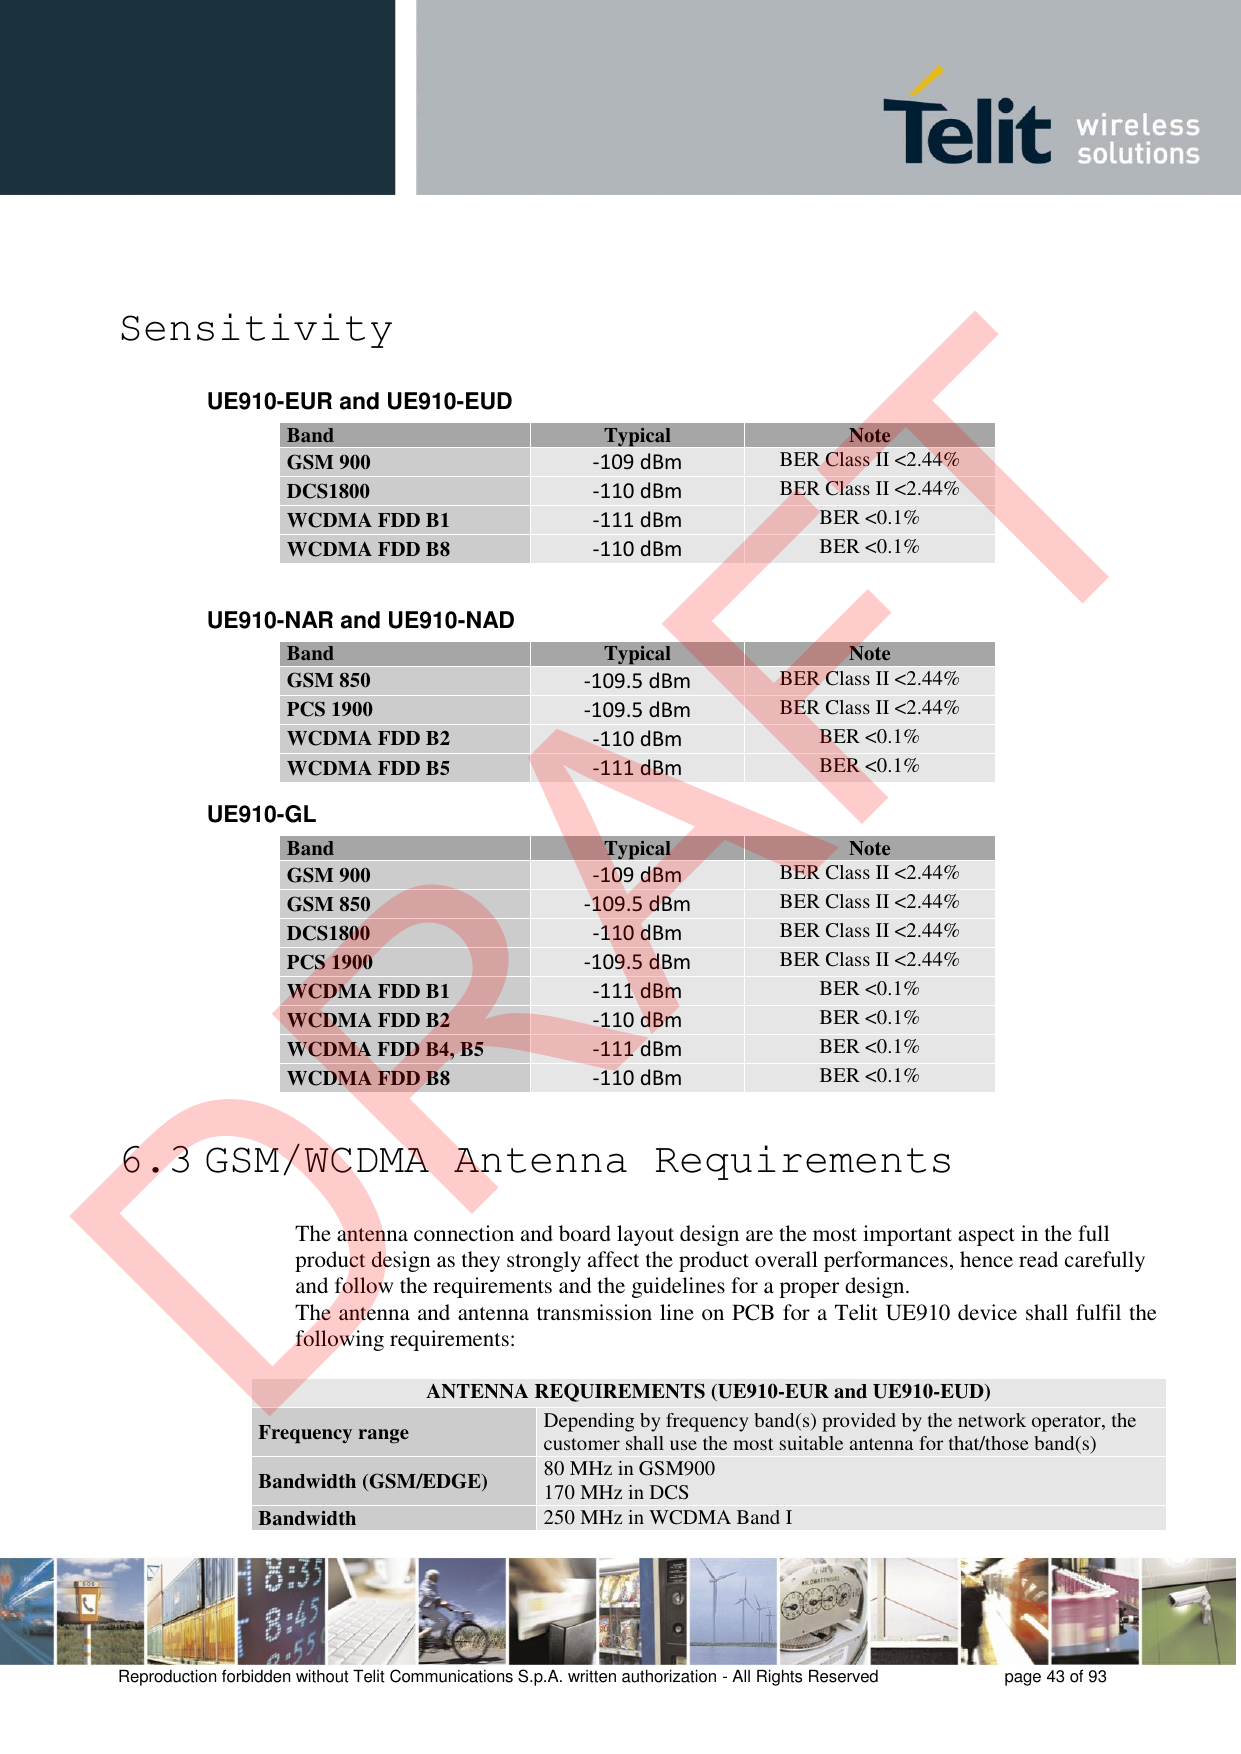 Reproduction forbidden without Telit Communications S.p.A. written authorization - All Rights Reserved  page 43 of 93 Sensitivity UE910-EUR and UE910-EUD UE910-NAR and UE910-NAD UE910-GL 6.3 GSM/WCDMA Antenna Requirements The antenna connection and board layout design are the most important aspect in the full product design as they strongly affect the product overall performances, hence read carefully and follow the requirements and the guidelines for a proper design. The antenna and antenna transmission line on PCB for a Telit UE910 device shall fulfil the following requirements:  ANTENNA REQUIREMENTS (UE910-EUR and UE910-EUD) Frequency range Depending by frequency band(s) provided by the network operator, the customer shall use the most suitable antenna for that/those band(s) Bandwidth (GSM/EDGE) 80 MHz in GSM900 170 MHz in DCS Bandwidth 250 MHz in WCDMA Band I Band Typical Note GSM 900 -109 dBmBER Class II &lt;2.44% DCS1800 -110 dBmBER Class II &lt;2.44% WCDMA FDD B1 -111 dBmBER &lt;0.1% WCDMA FDD B8 -110 dBmBER &lt;0.1% Band Typical Note GSM 850 -109.5 dBmBER Class II &lt;2.44% PCS 1900 -109.5 dBmBER Class II &lt;2.44% WCDMA FDD B2 -110 dBmBER &lt;0.1% WCDMA FDD B5 -111 dBmBER &lt;0.1% Band Typical Note GSM 900 -109 dBmBER Class II &lt;2.44% GSM 850 -109.5 dBmBER Class II &lt;2.44% DCS1800 -110 dBmBER Class II &lt;2.44% PCS 1900 -109.5 dBmBER Class II &lt;2.44% WCDMA FDD B1 -111 dBmBER &lt;0.1% WCDMA FDD B2 -110 dBmBER &lt;0.1% WCDMA FDD B4, B5 -111 dBmBER &lt;0.1% WCDMA FDD B8 -110 dBmBER &lt;0.1% DRAFT